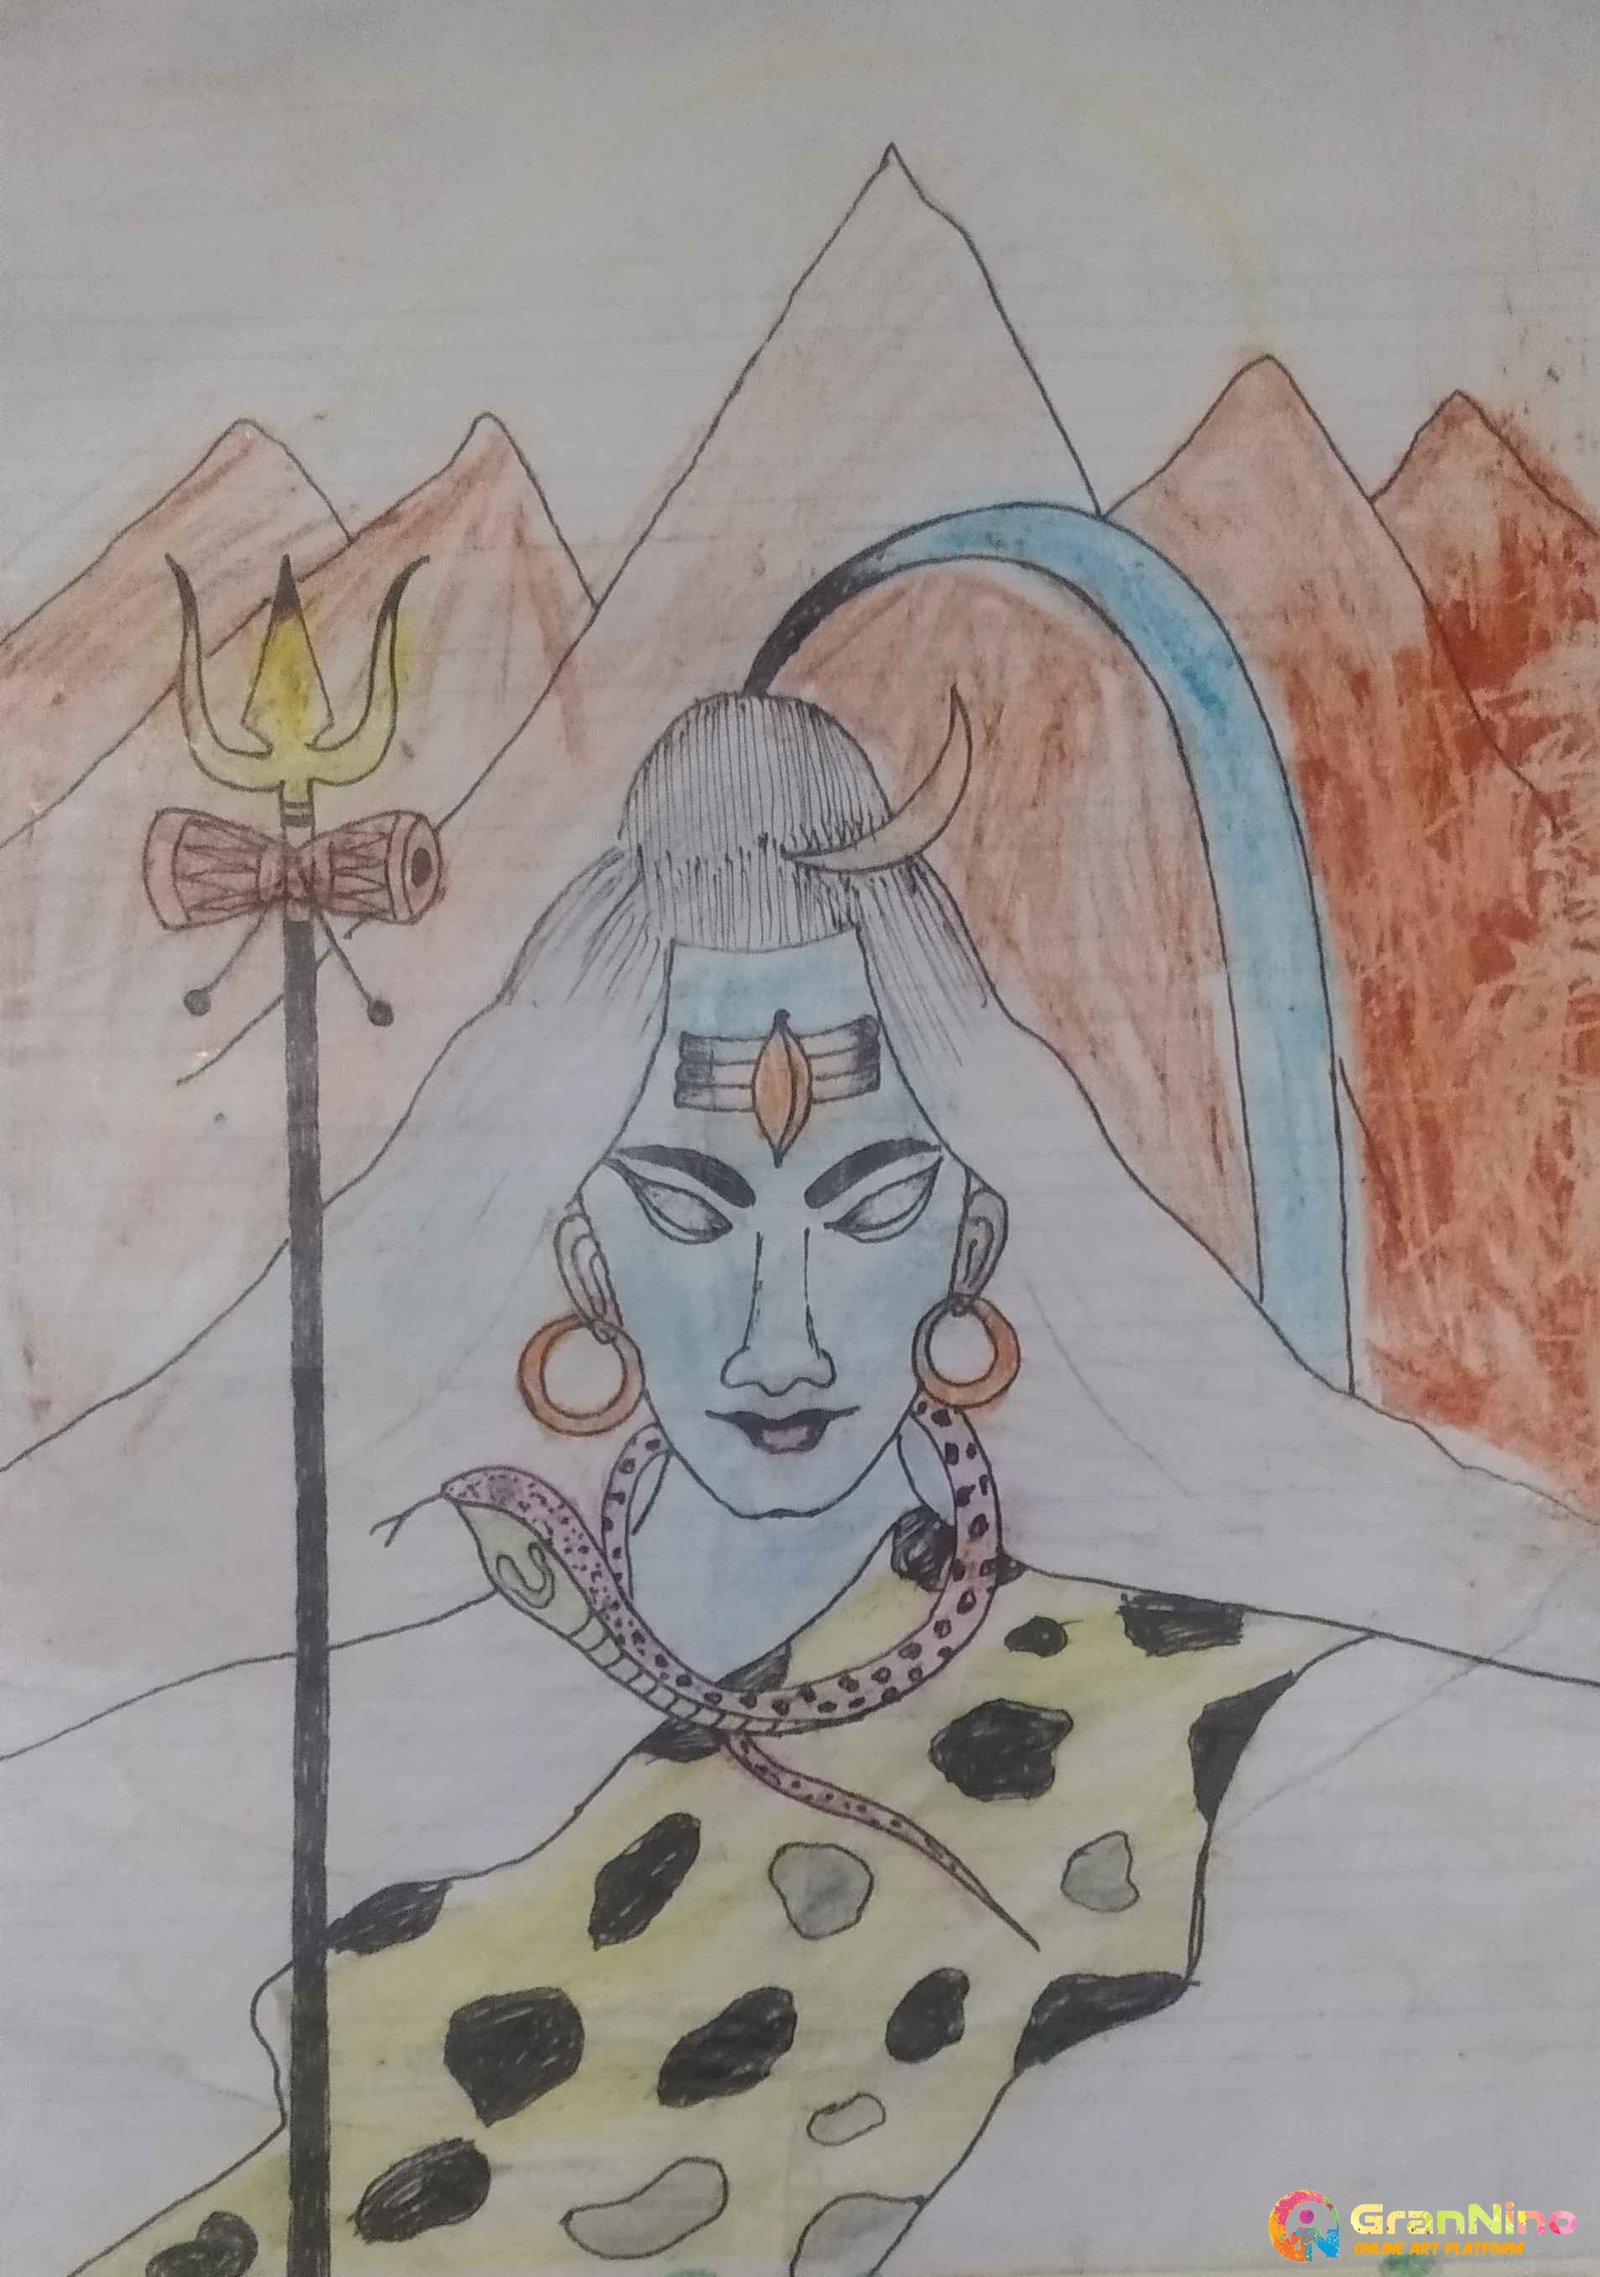 Lord Shiva (Sketch) by totallytacosnax on DeviantArt